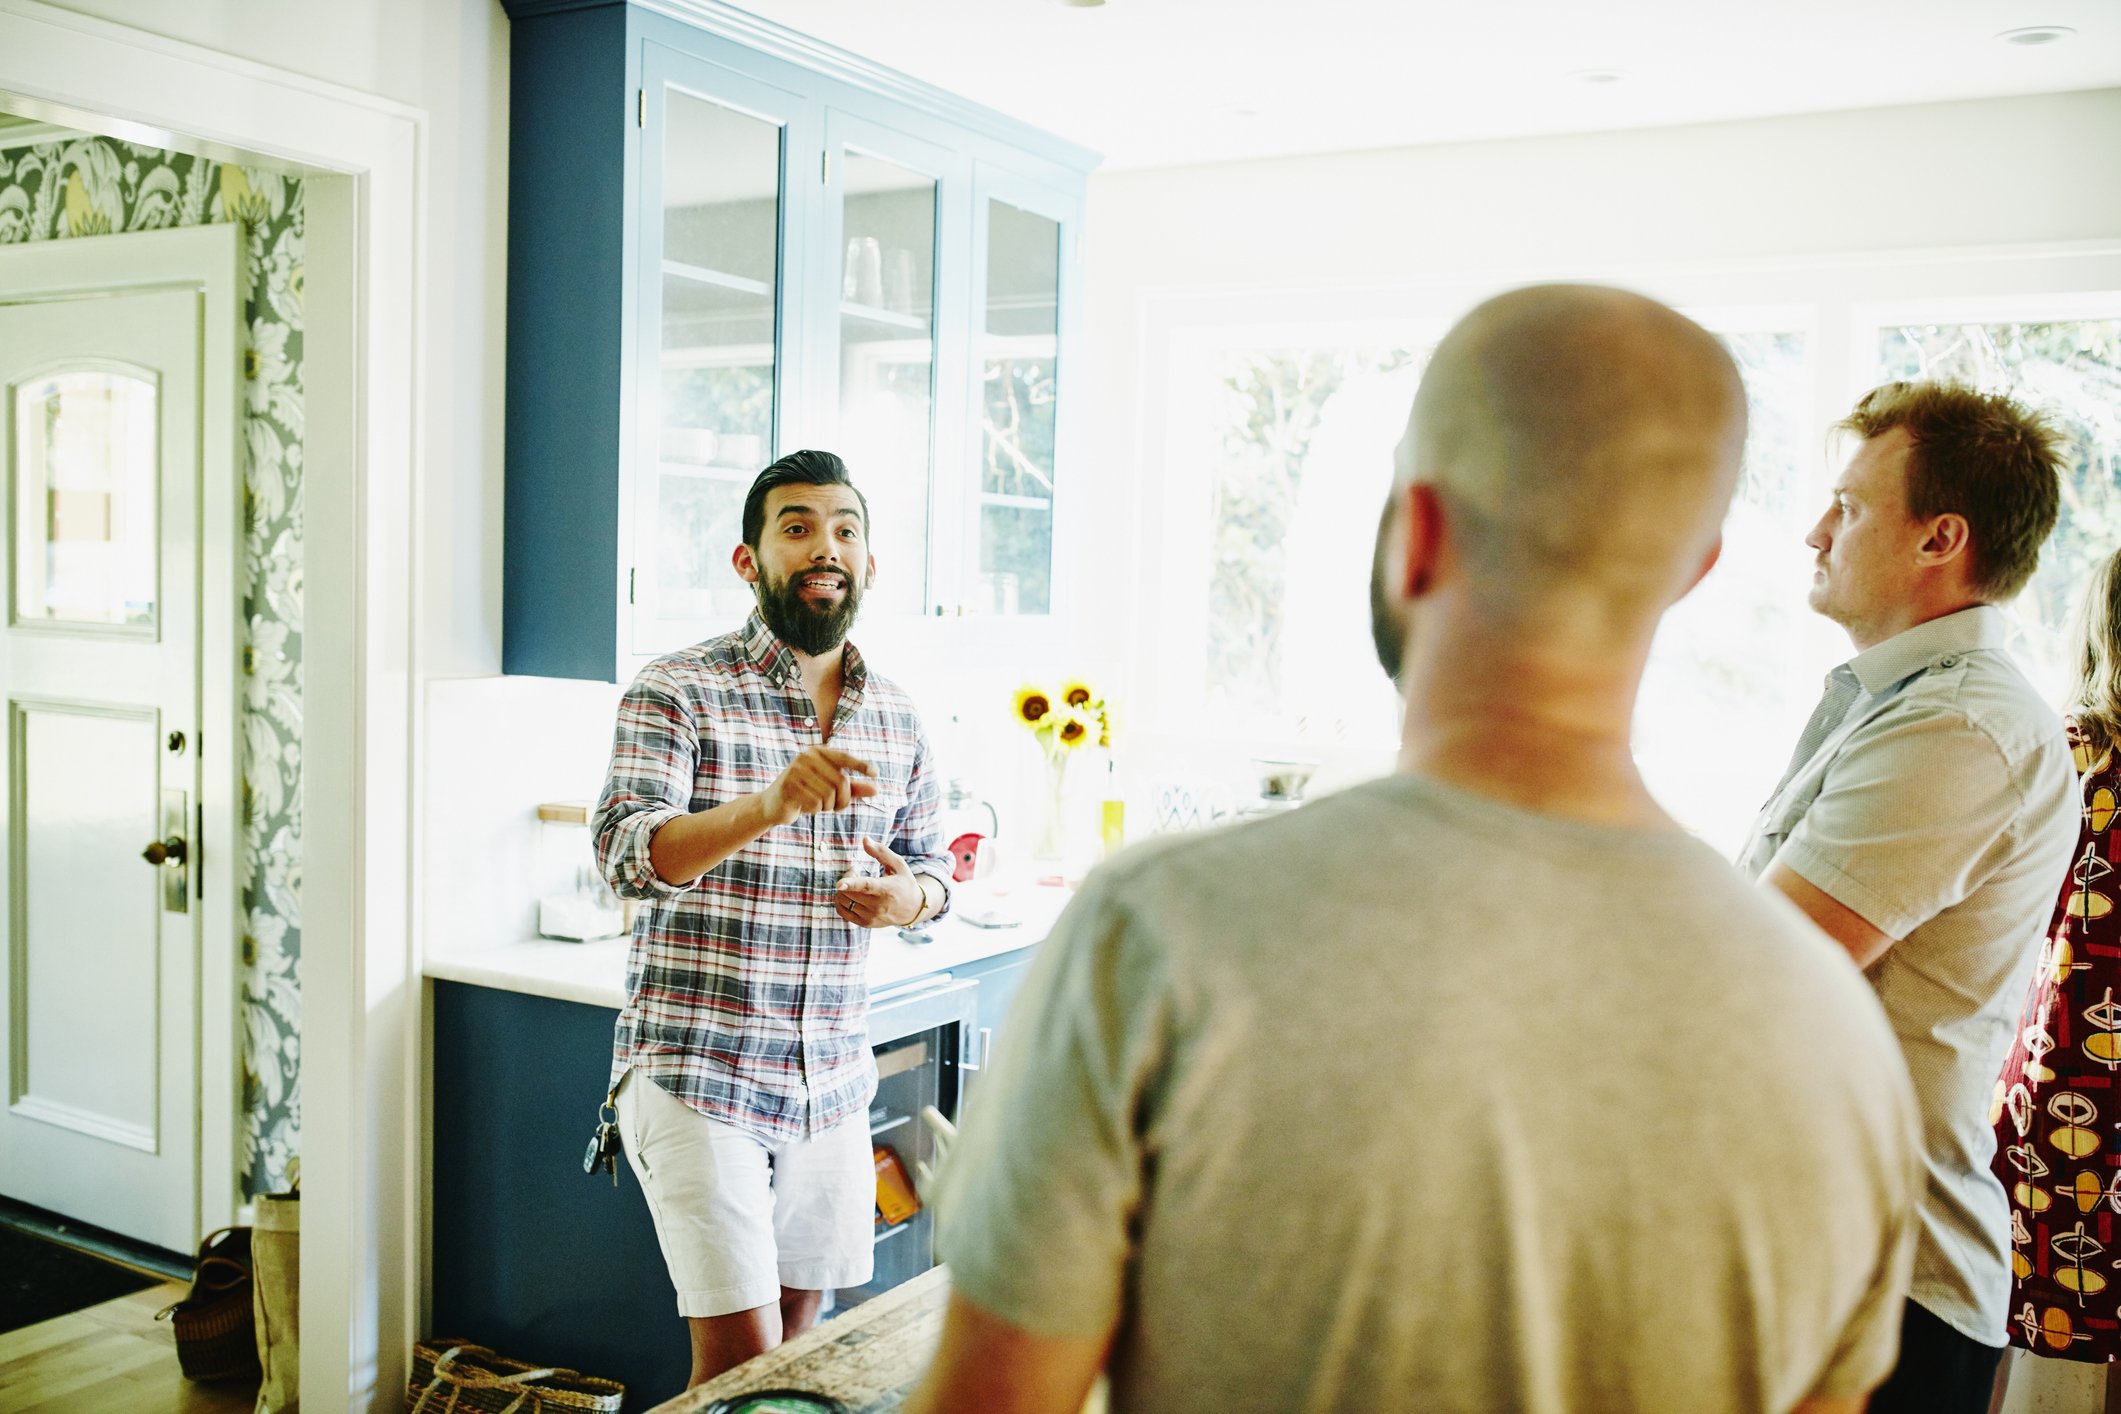 Man in discussion with friends in kitchen  | Photo: Getty Images